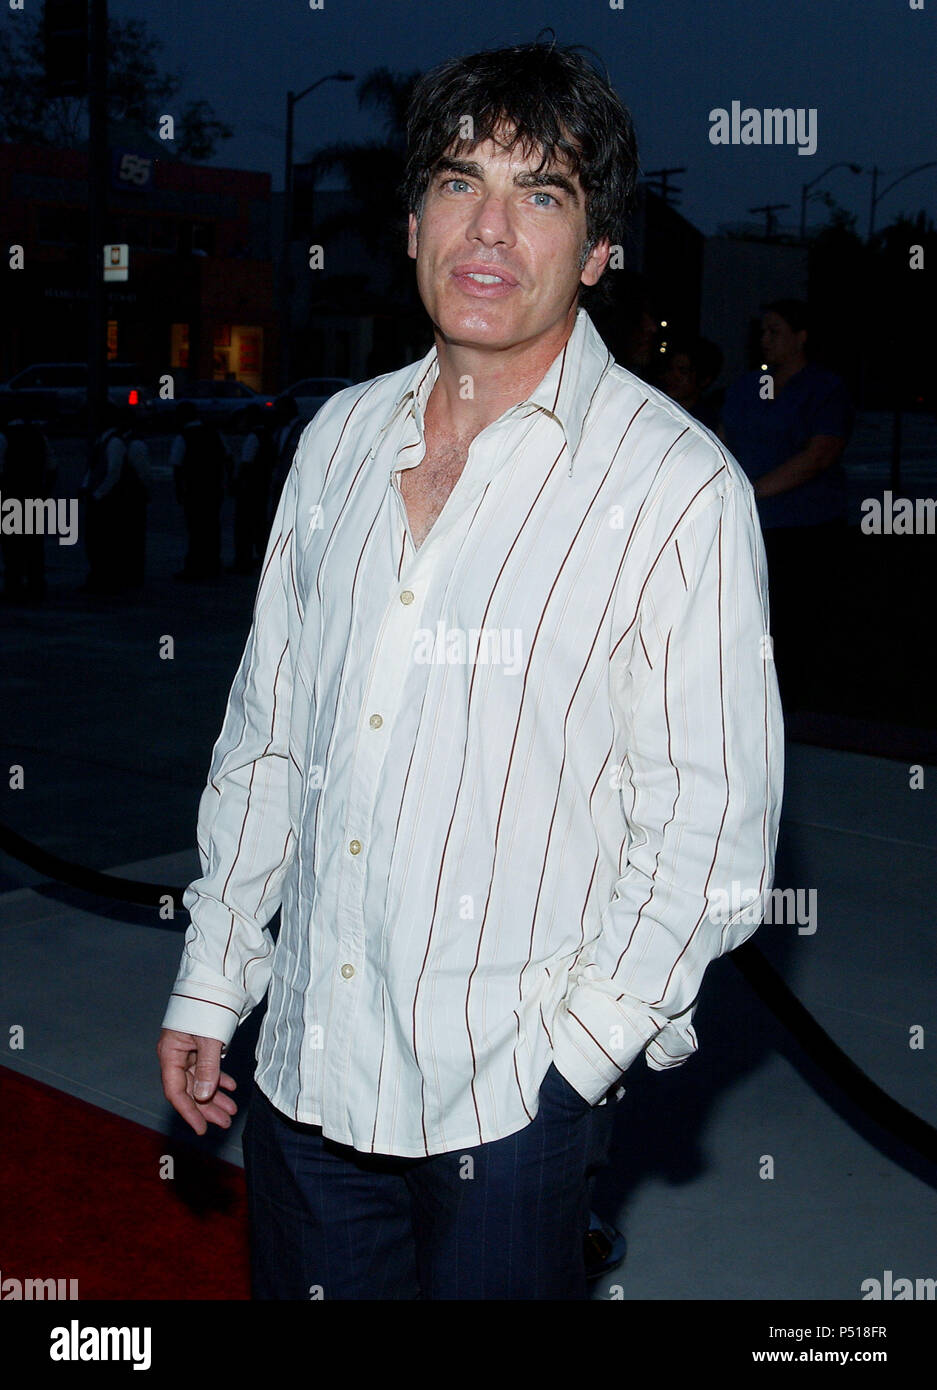 Peter Gallagher (OC) arriving at the ' 2003 Fox Summer tca Party ' at the Pacific Design Center in Los Angeles. july 18, 2003.GallagherPeter OC320 Red Carpet Event, Vertical, USA, Film Industry, Celebrities,  Photography, Bestof, Arts Culture and Entertainment, Topix Celebrities fashion /  Vertical, Best of, Event in Hollywood Life - California,  Red Carpet and backstage, USA, Film Industry, Celebrities,  movie celebrities, TV celebrities, Music celebrities, Photography, Bestof, Arts Culture and Entertainment,  Topix, vertical, one person,, from the years , 2003 to 2005, inquiry tsuni@Gamma-US Stock Photo